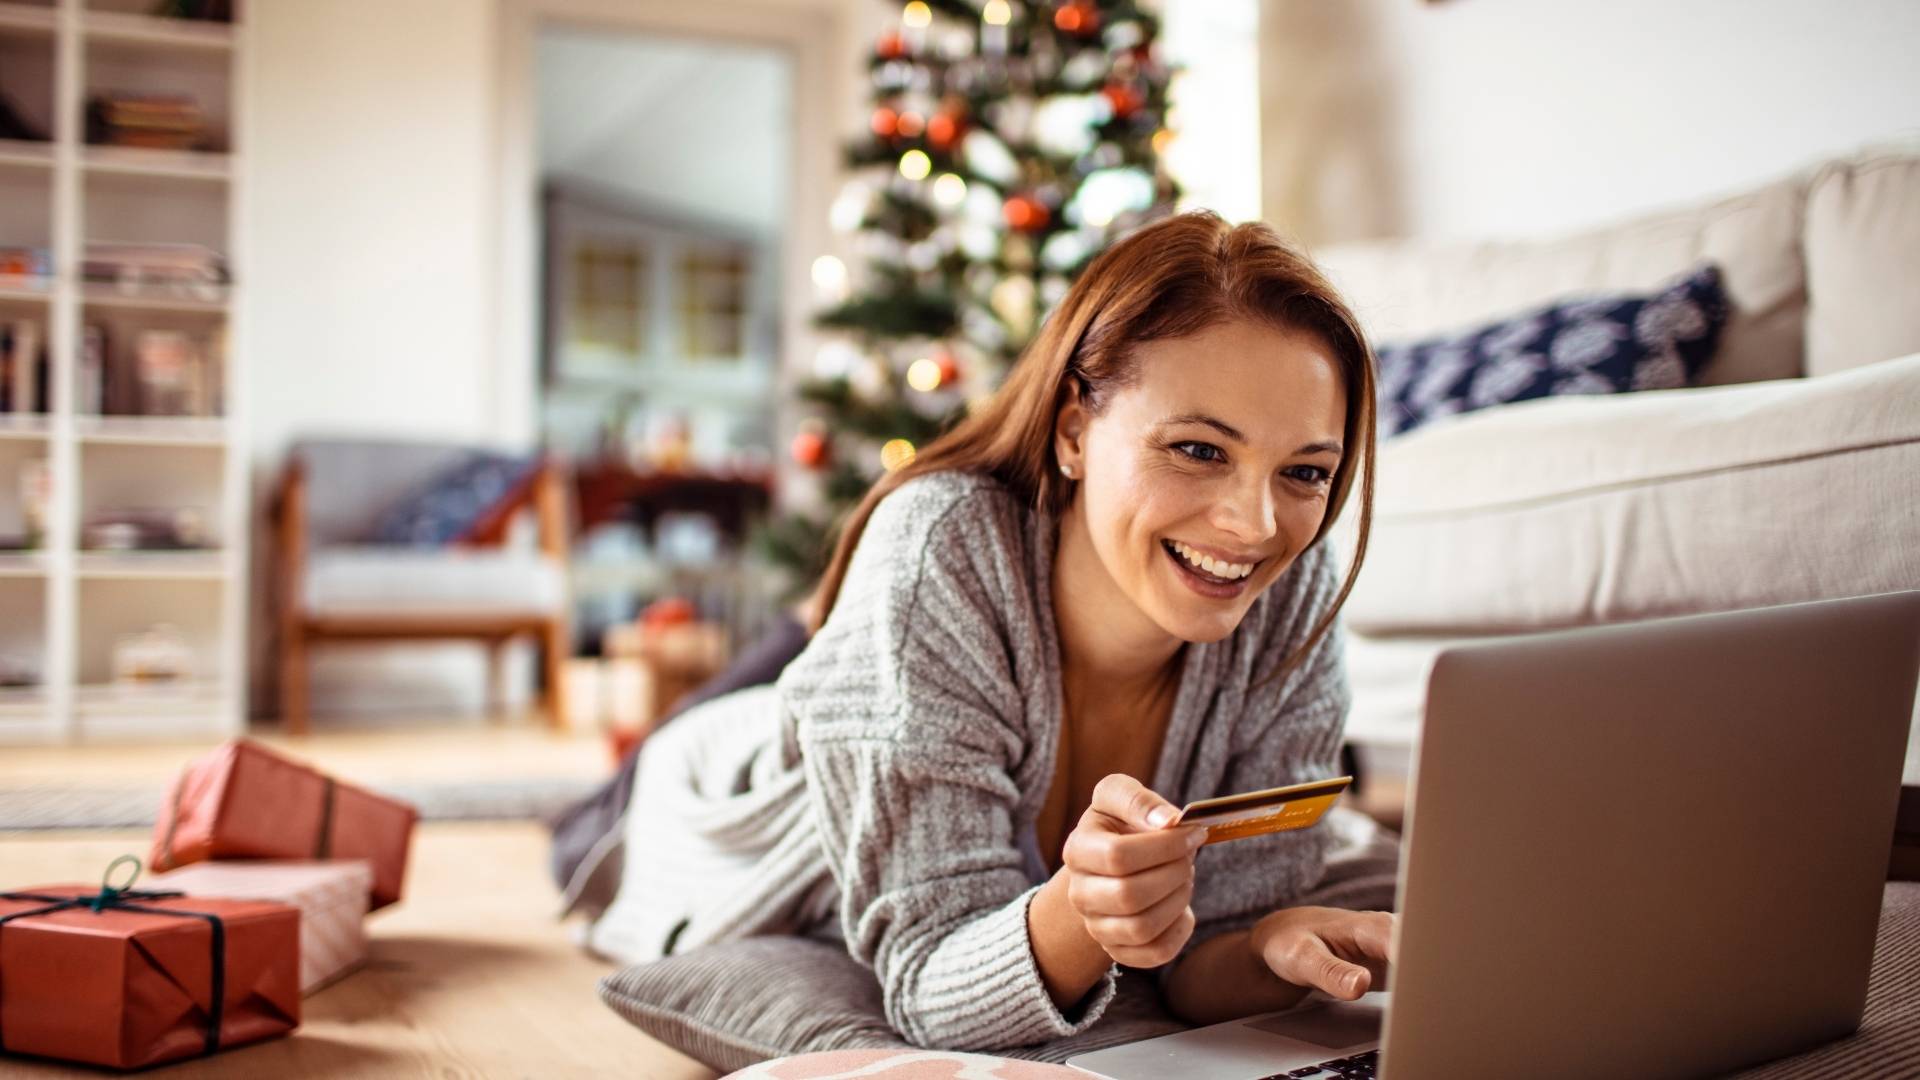 Relaxing while shopping for holiday gifts online